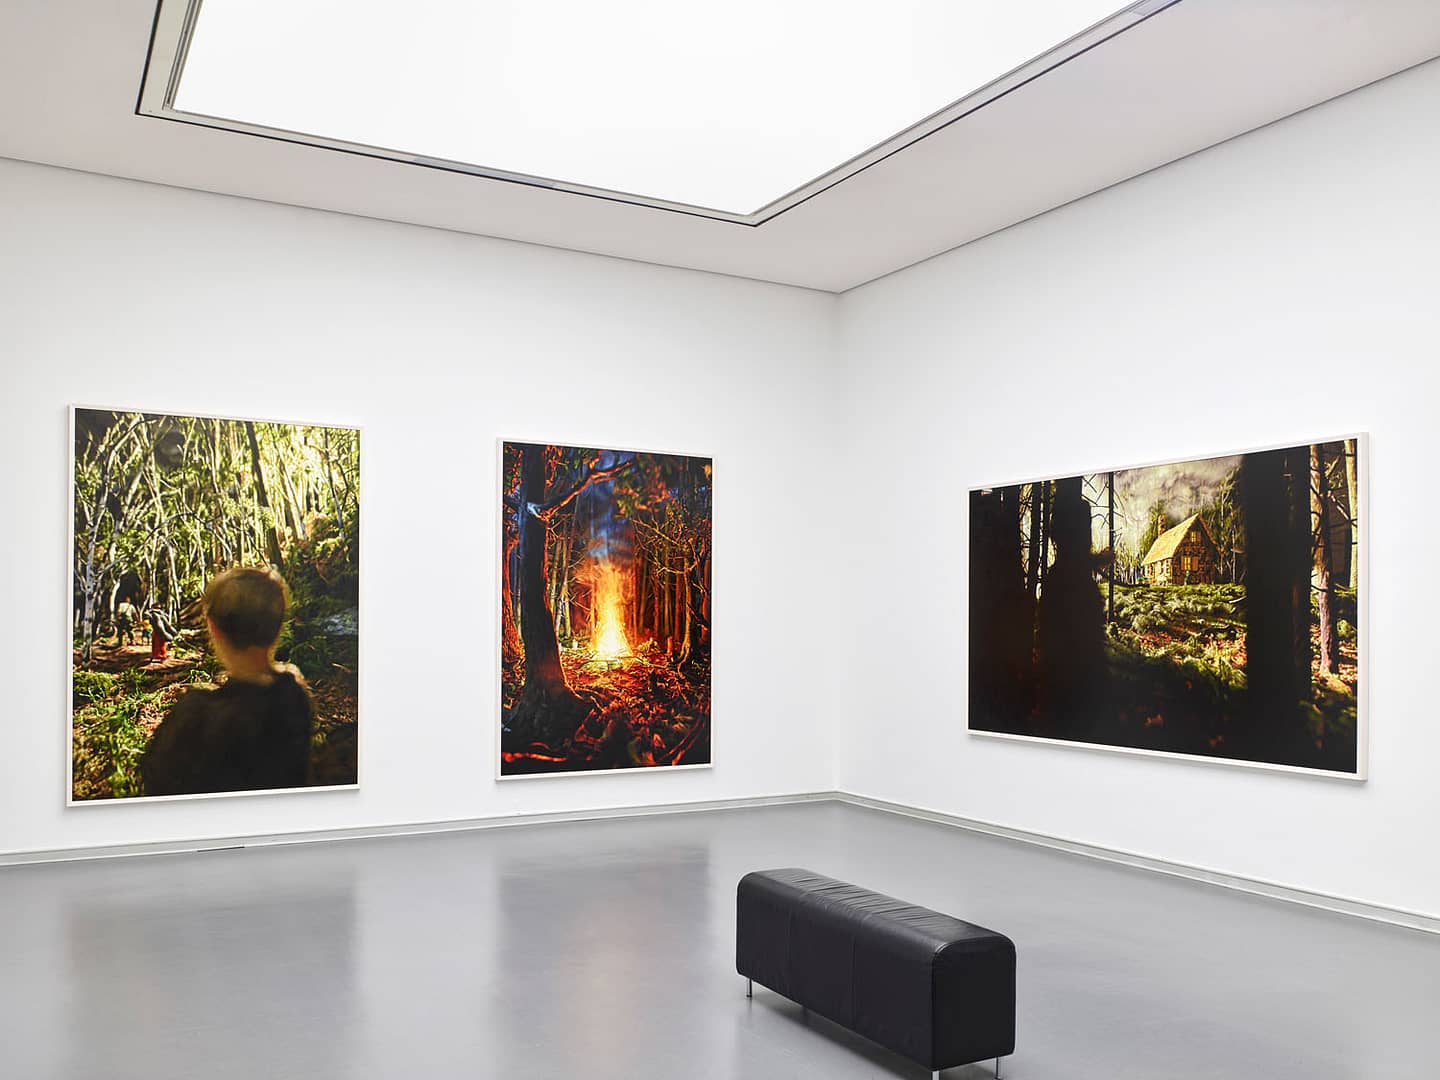 Exhibition view of Philipp Fröhlich's solo show Märchen at Von der Heydt Kunsthalle Barmen, produced by Kunst- und Museumsverein Wuppertal. The image shows three paintings from Philipp Fröhlich's cycle on Hänsel and Gretel by the brothers Grimm.